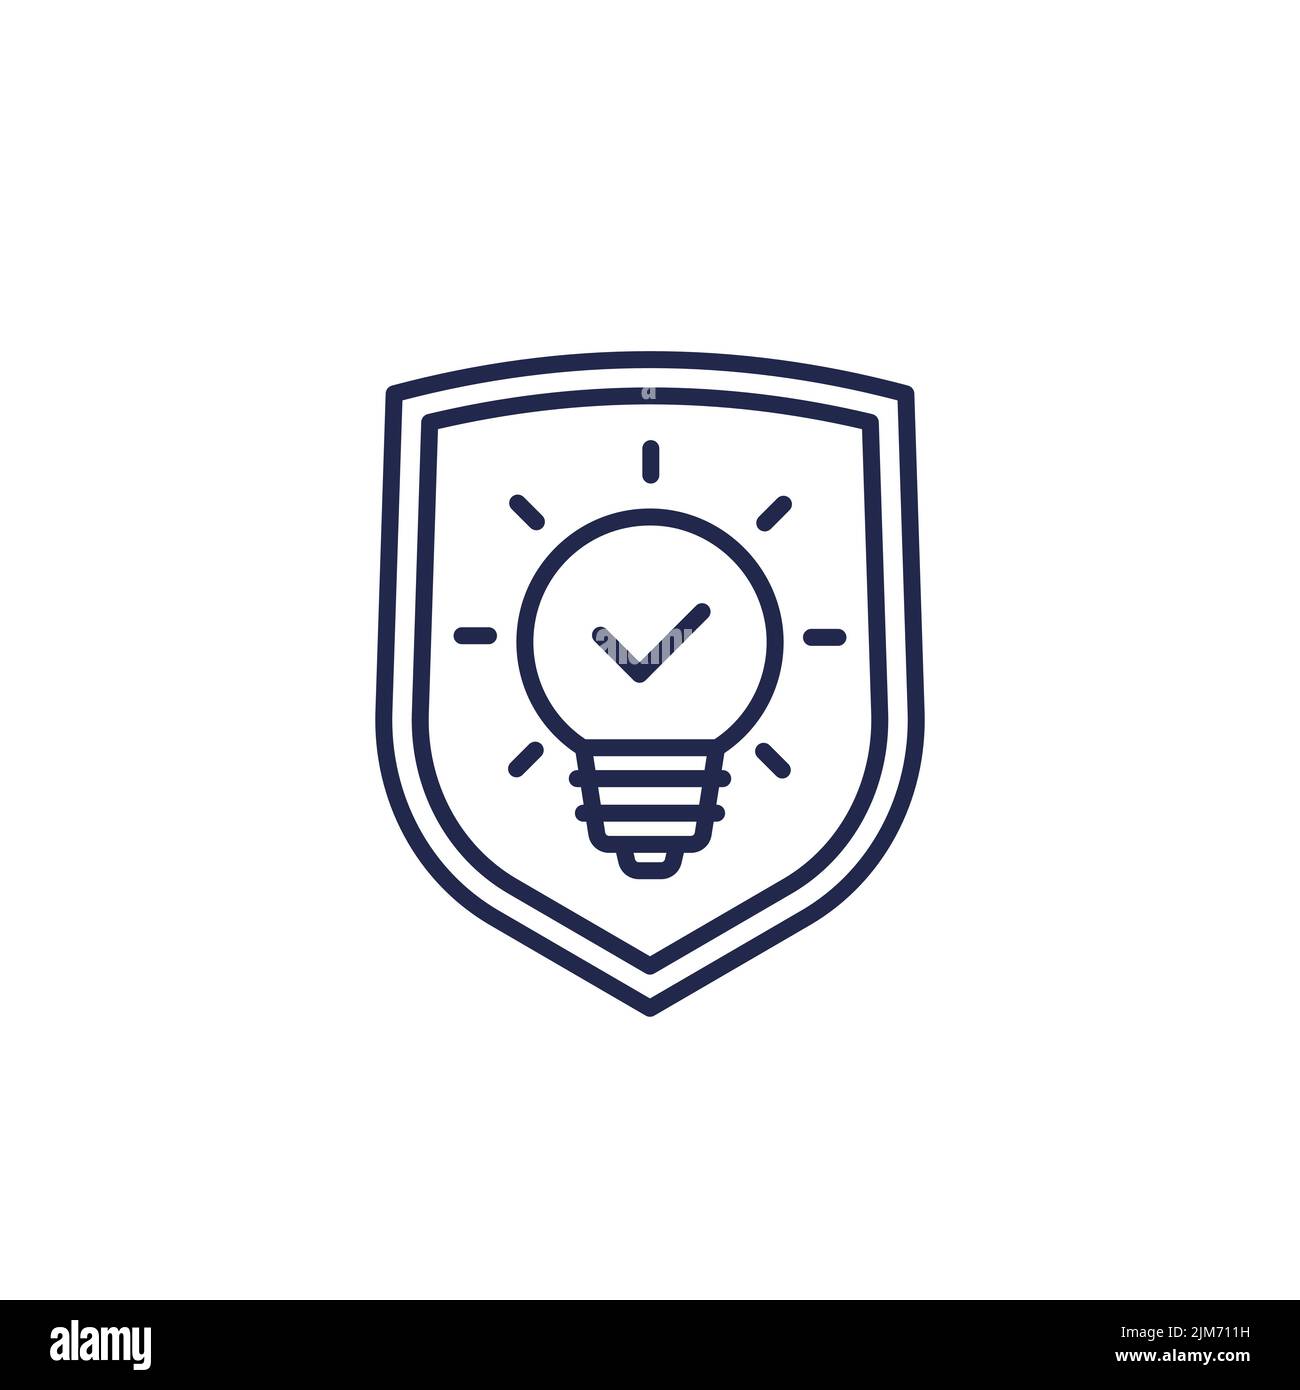 patent protection line icon with a shield Stock Vector